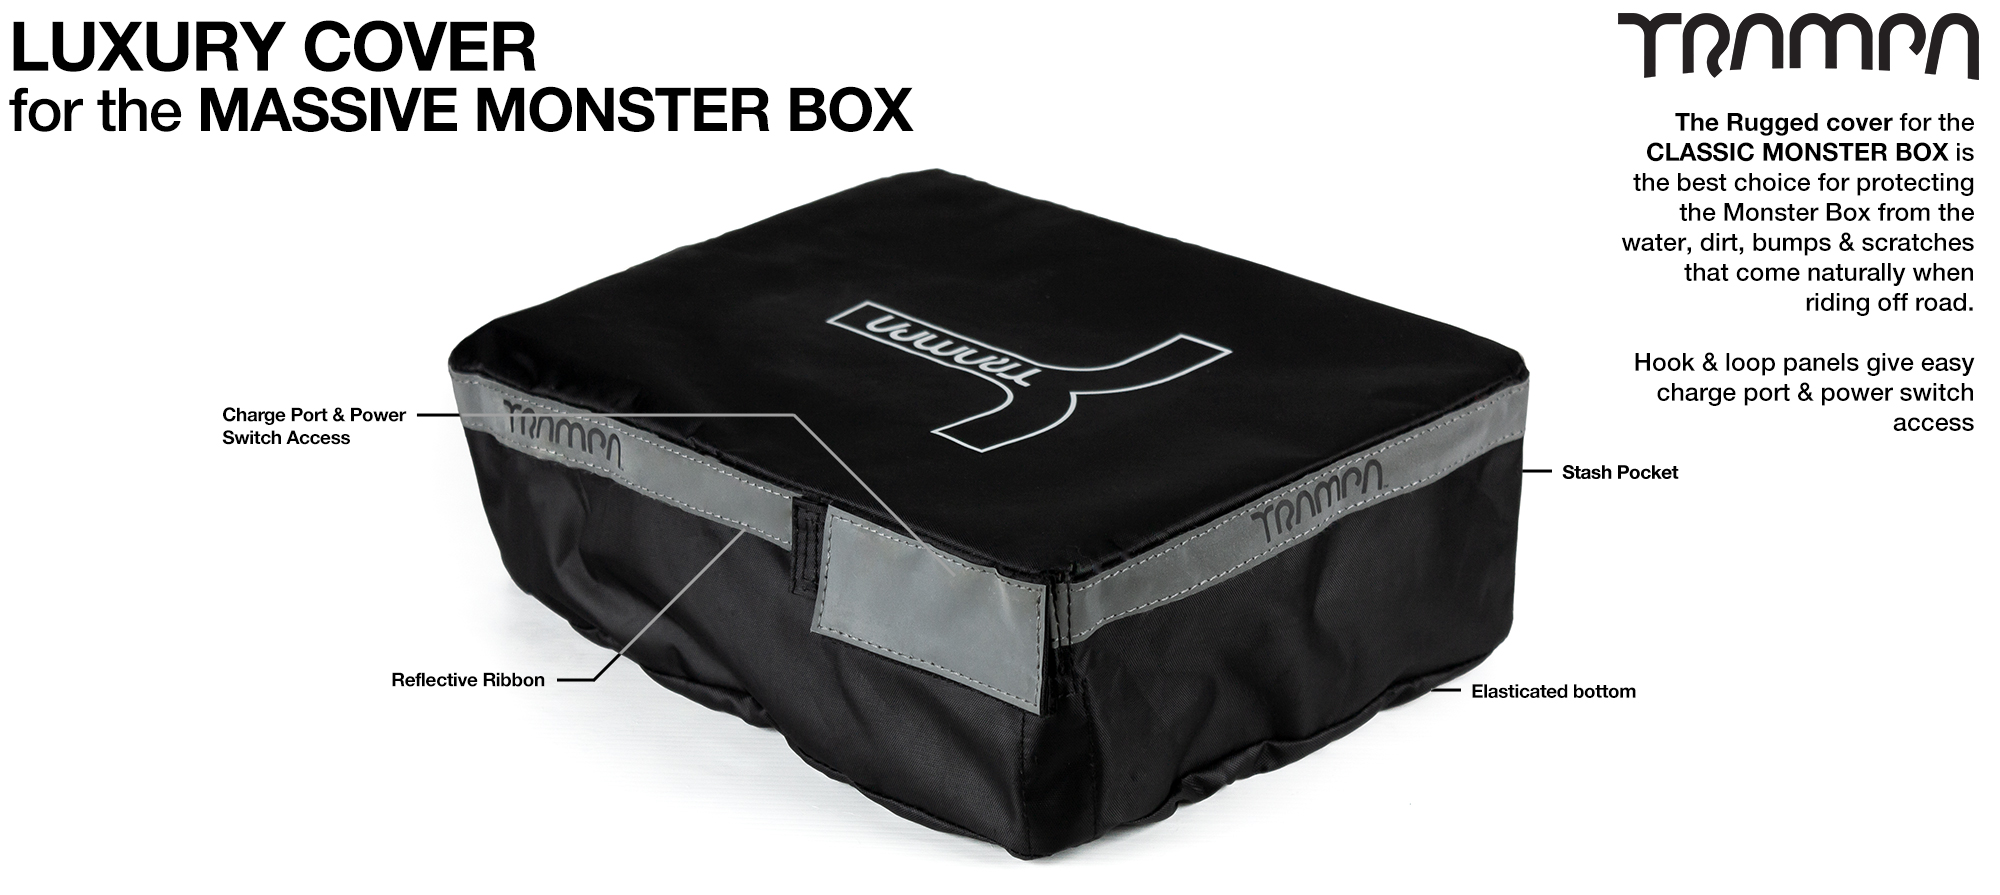 MASSIVE Monster Box HEAVY DUTY / LUXURY protective Cover with Inspection pit & tool Pockets